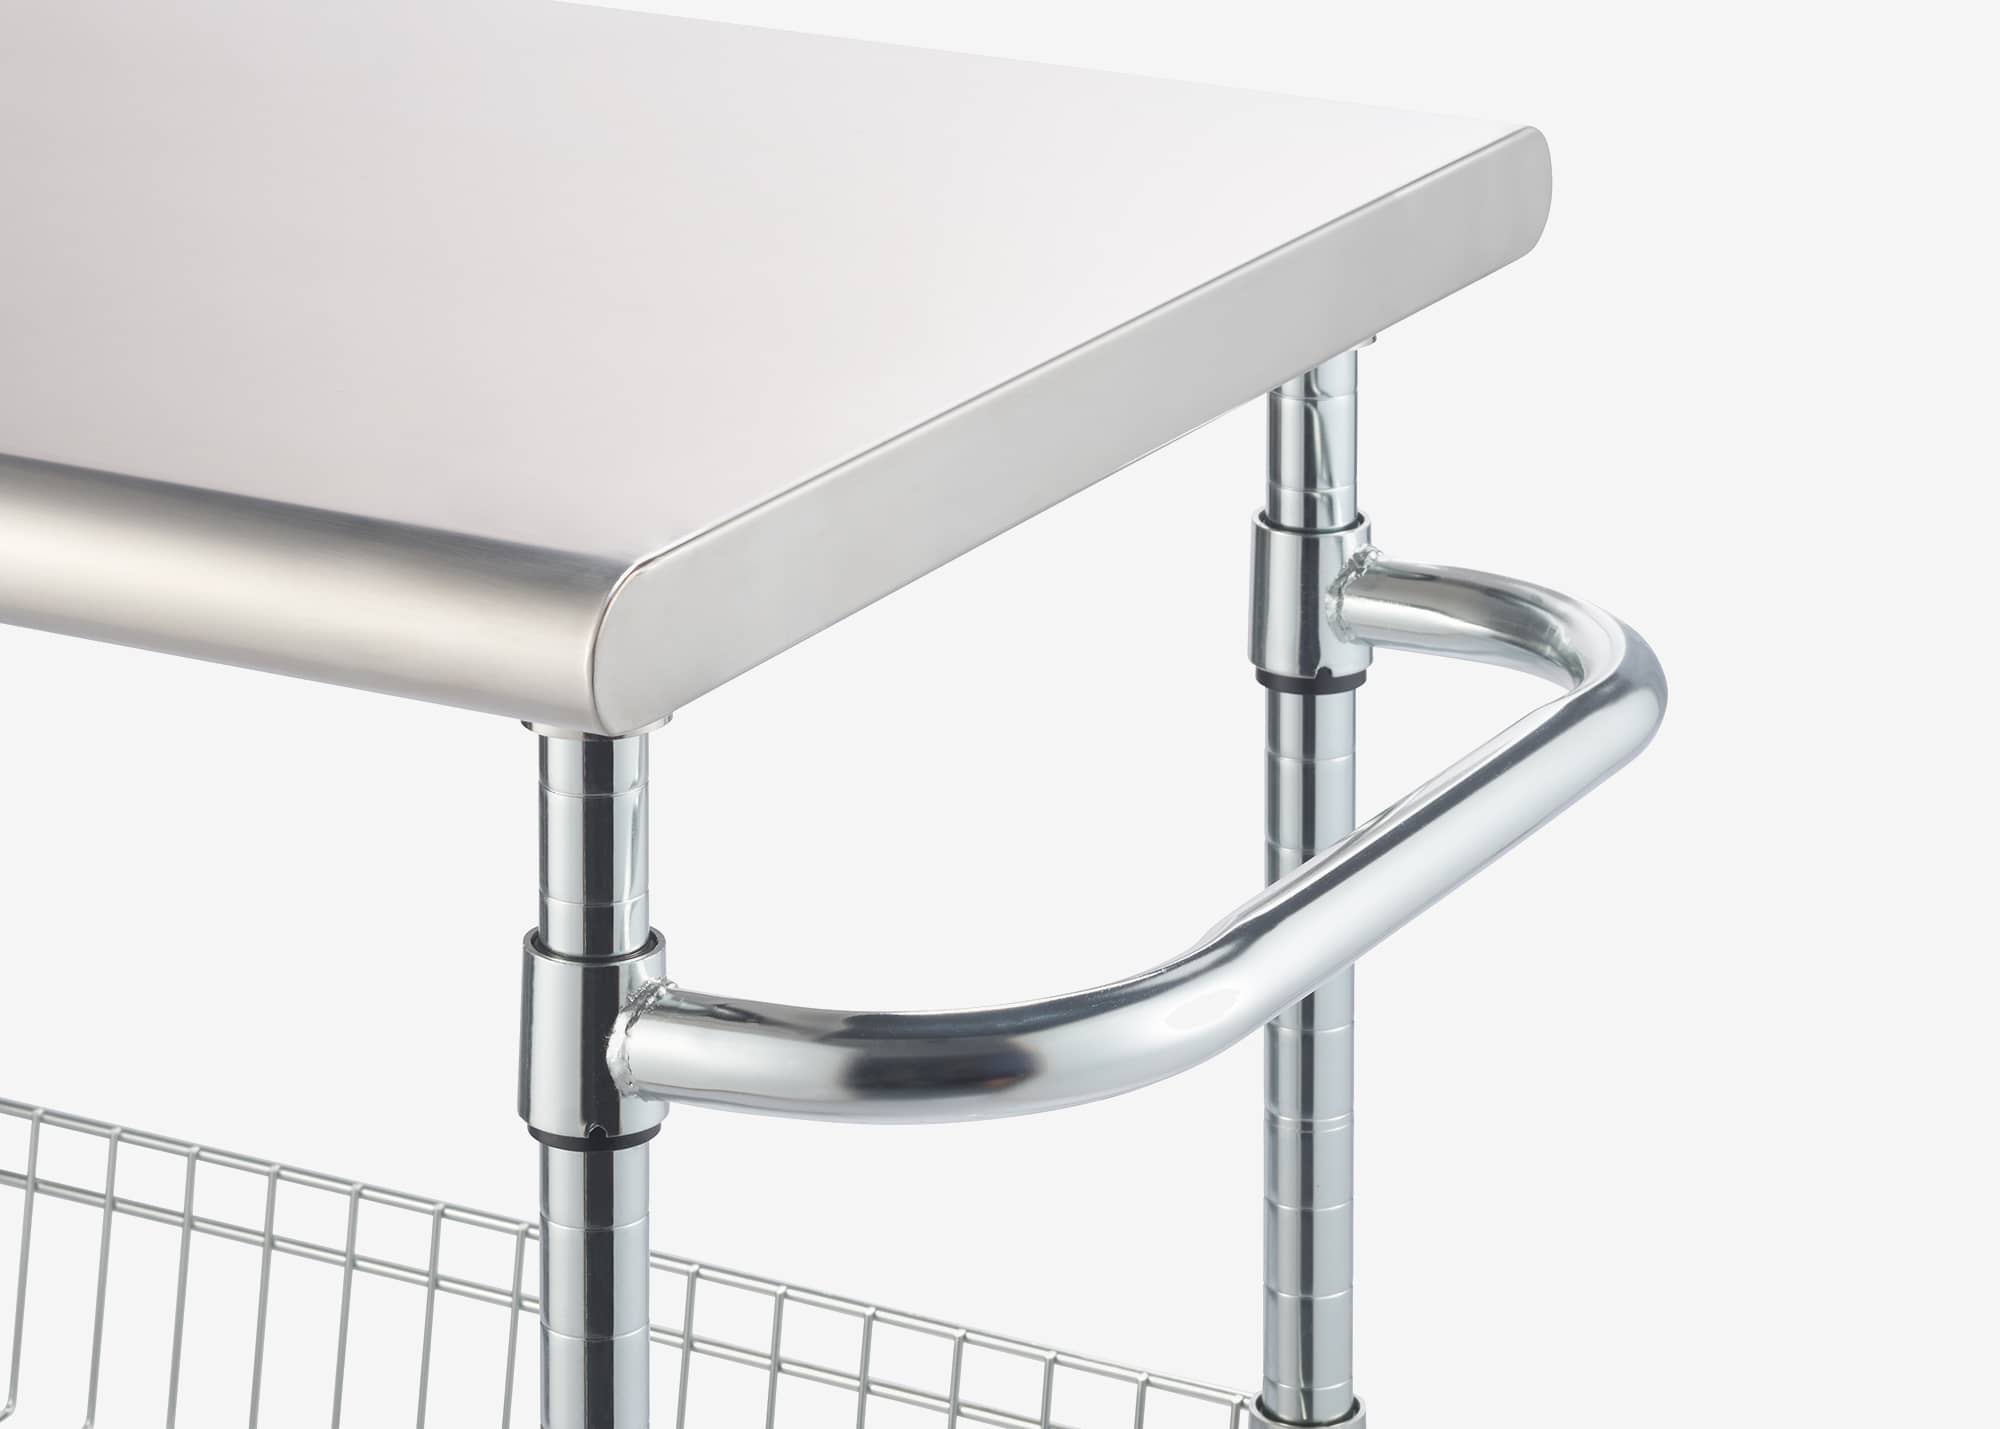 rounded handle of the kitchen cart